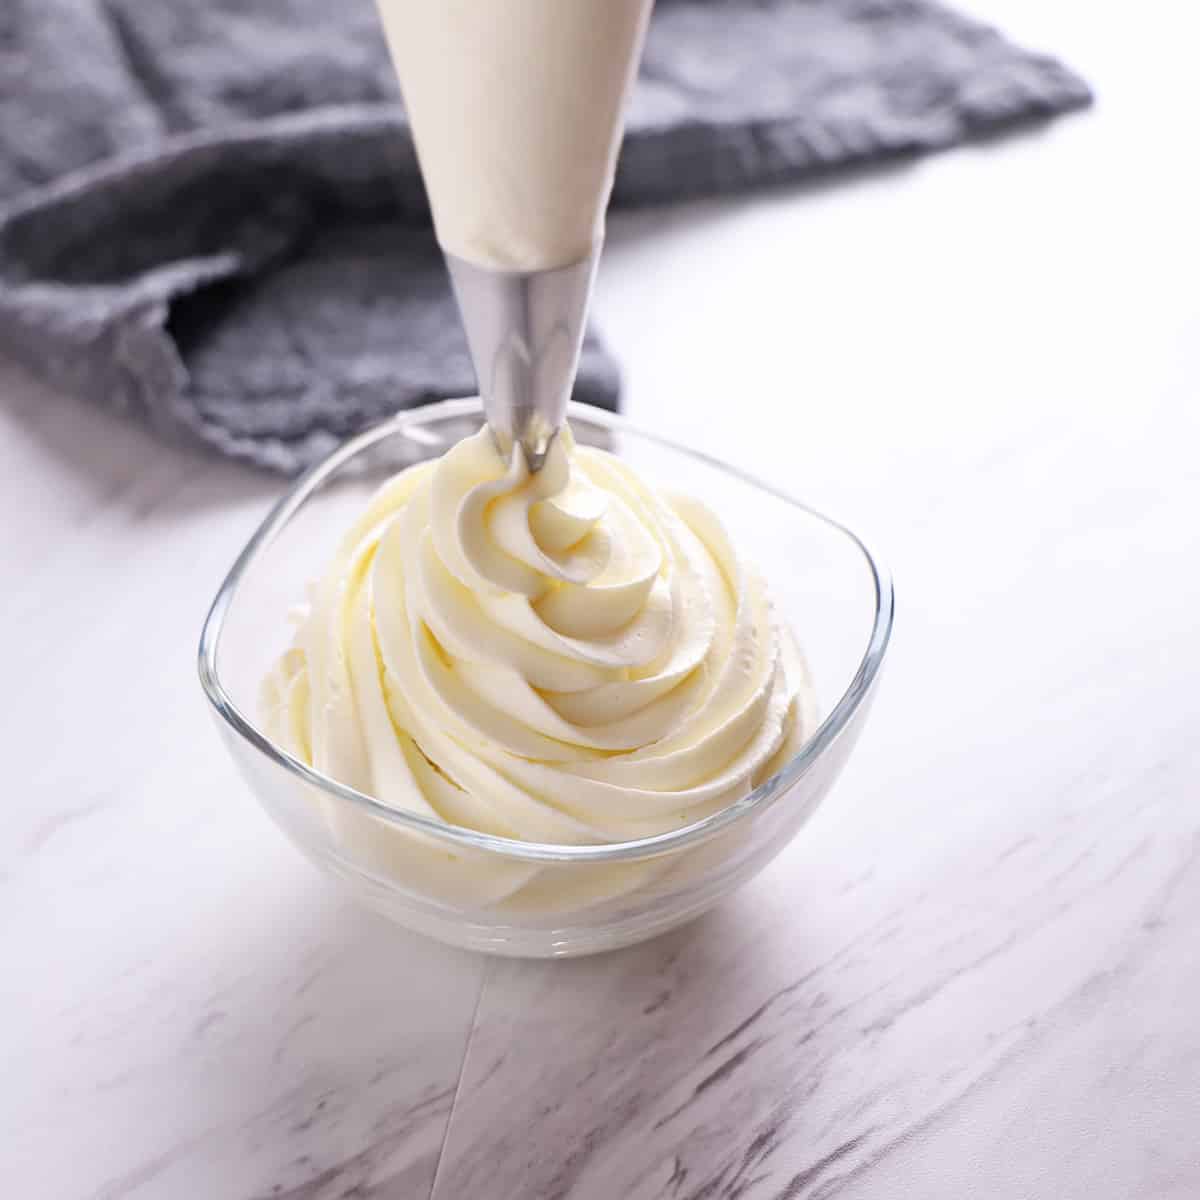 Chantilly Cream (French whipped cream) - Amira's Pantry